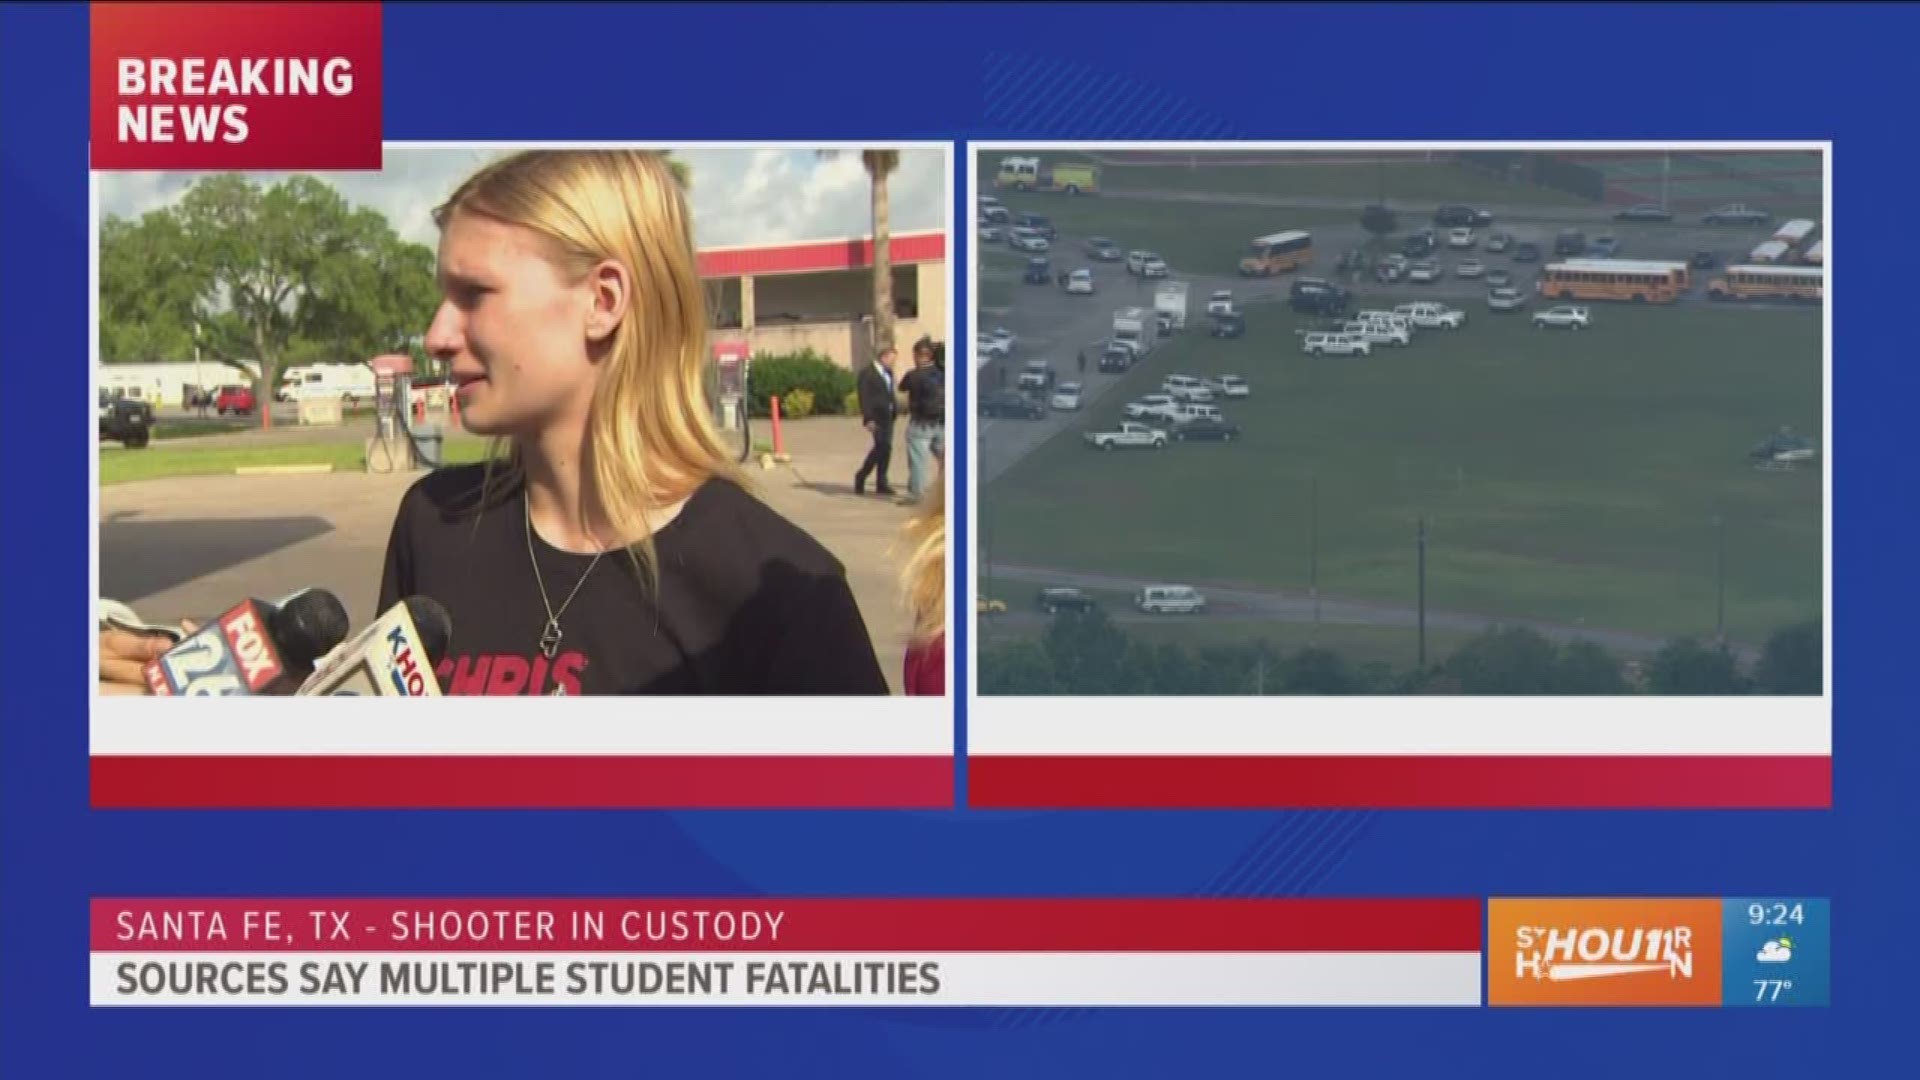 An emotional student says her friend helped her flee the scene of Friday morning's shooting at Santa Fe High School.